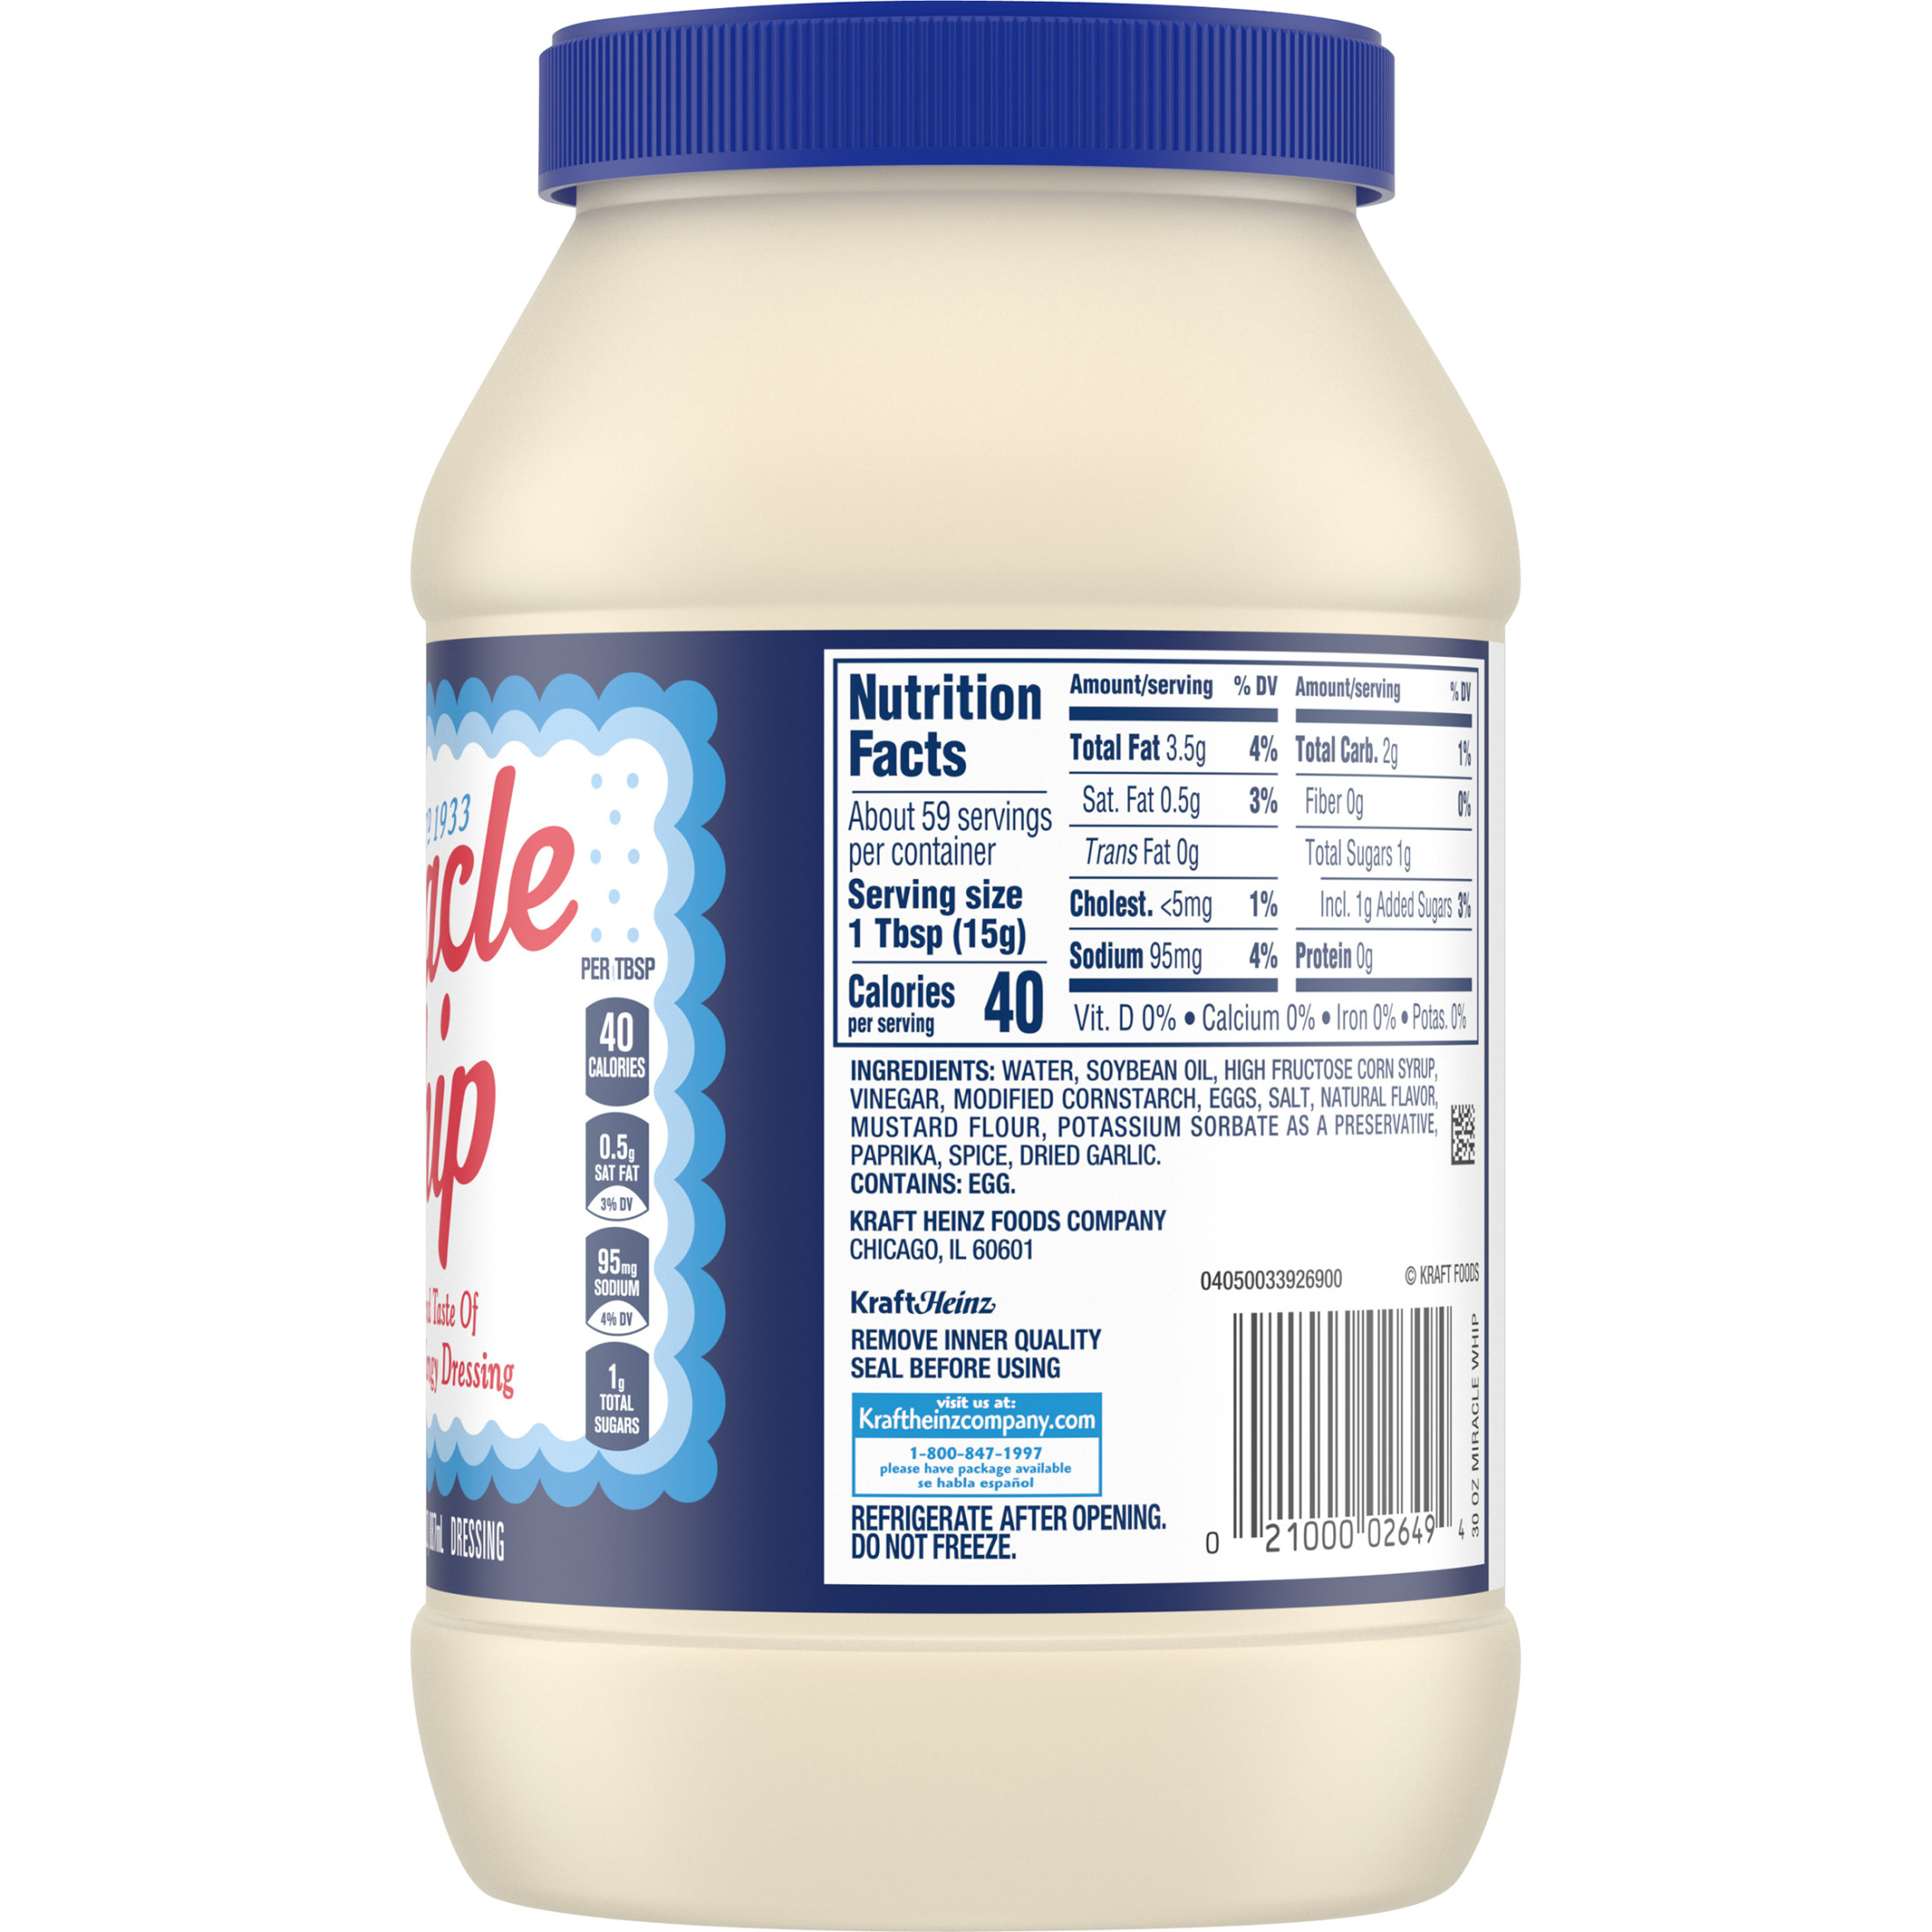 Miracle Whip Mayo-like Dressing, for a Keto and Low Carb Lifestyle, 30 fl oz Jar - image 15 of 16